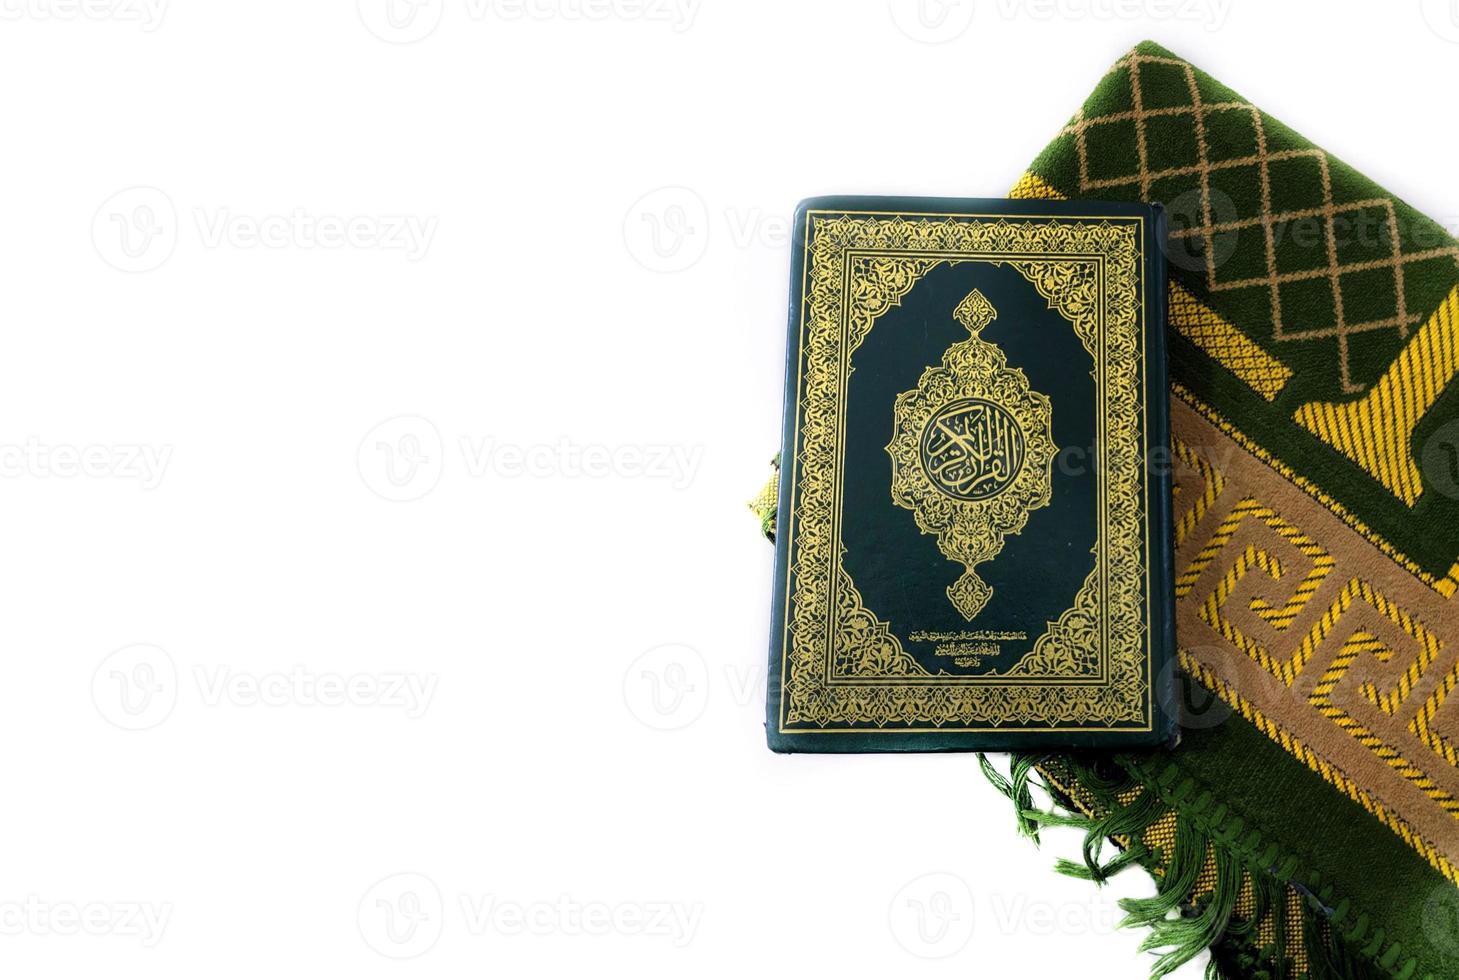 Photos of the Koran and prayer rugs ready for Ramadan.  Arabic on the cover is translated as the Qur'an